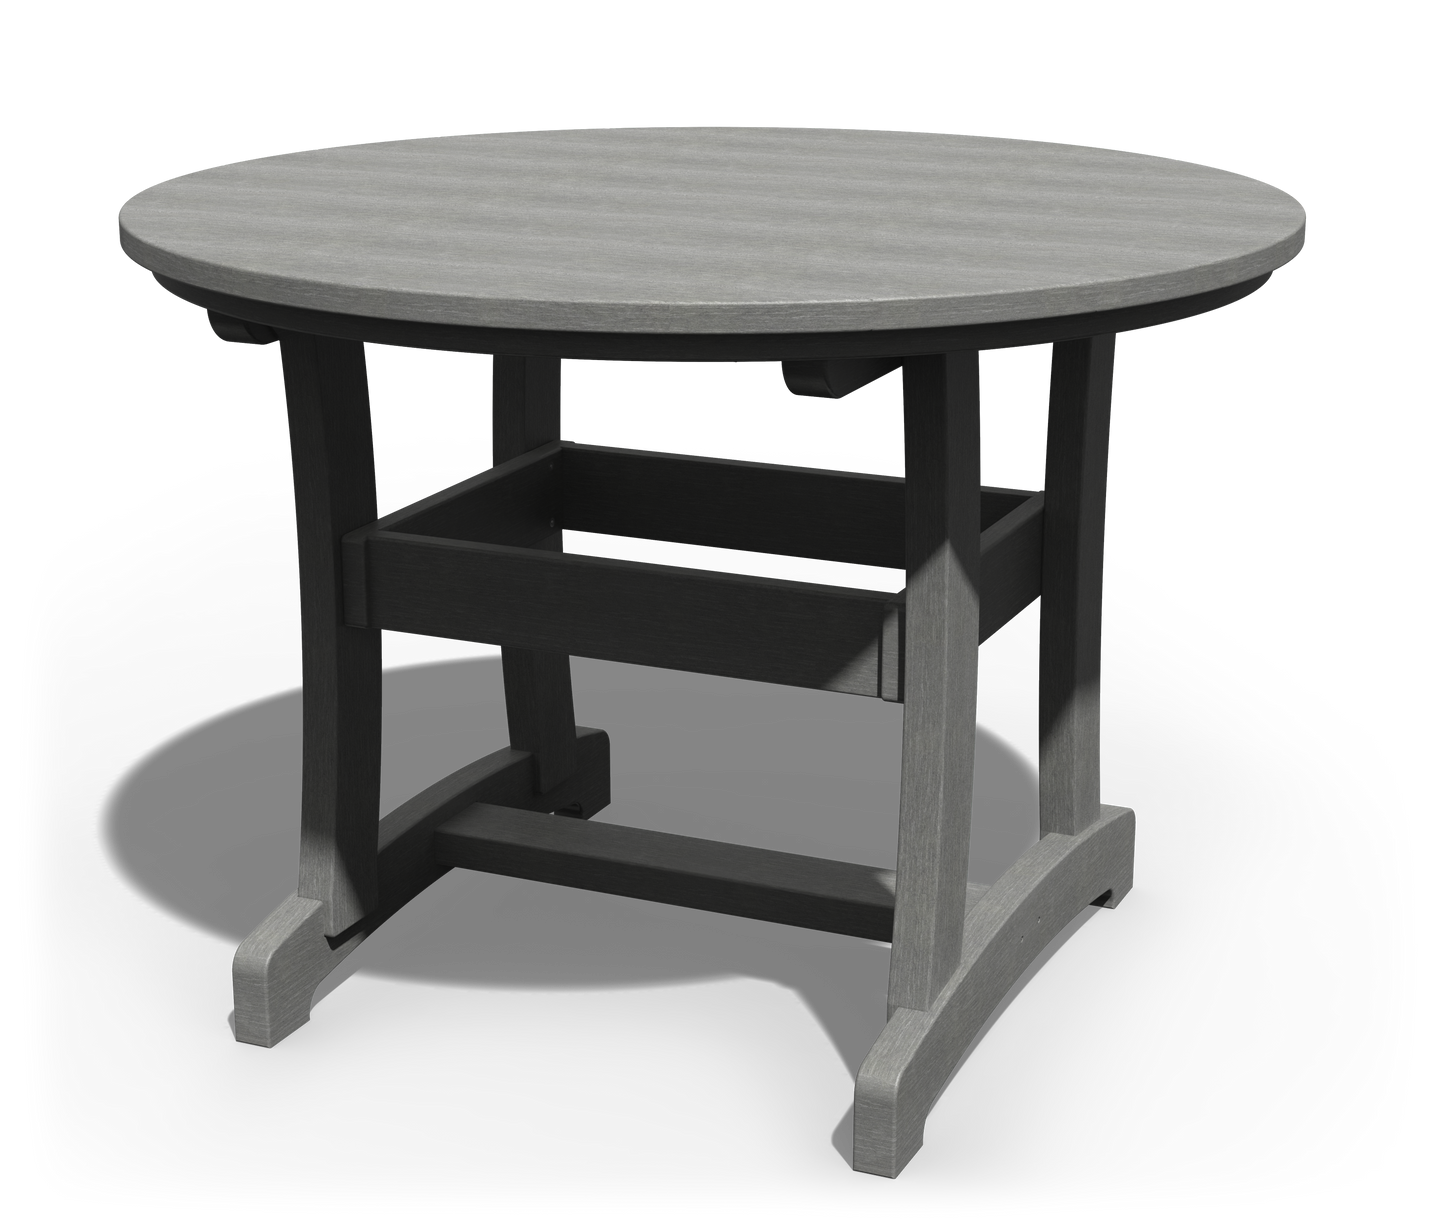 Patiova Recycled Plastic 42" Round Legacy Dining Table - LEAD TIME TO SHIP 4 WEEKS